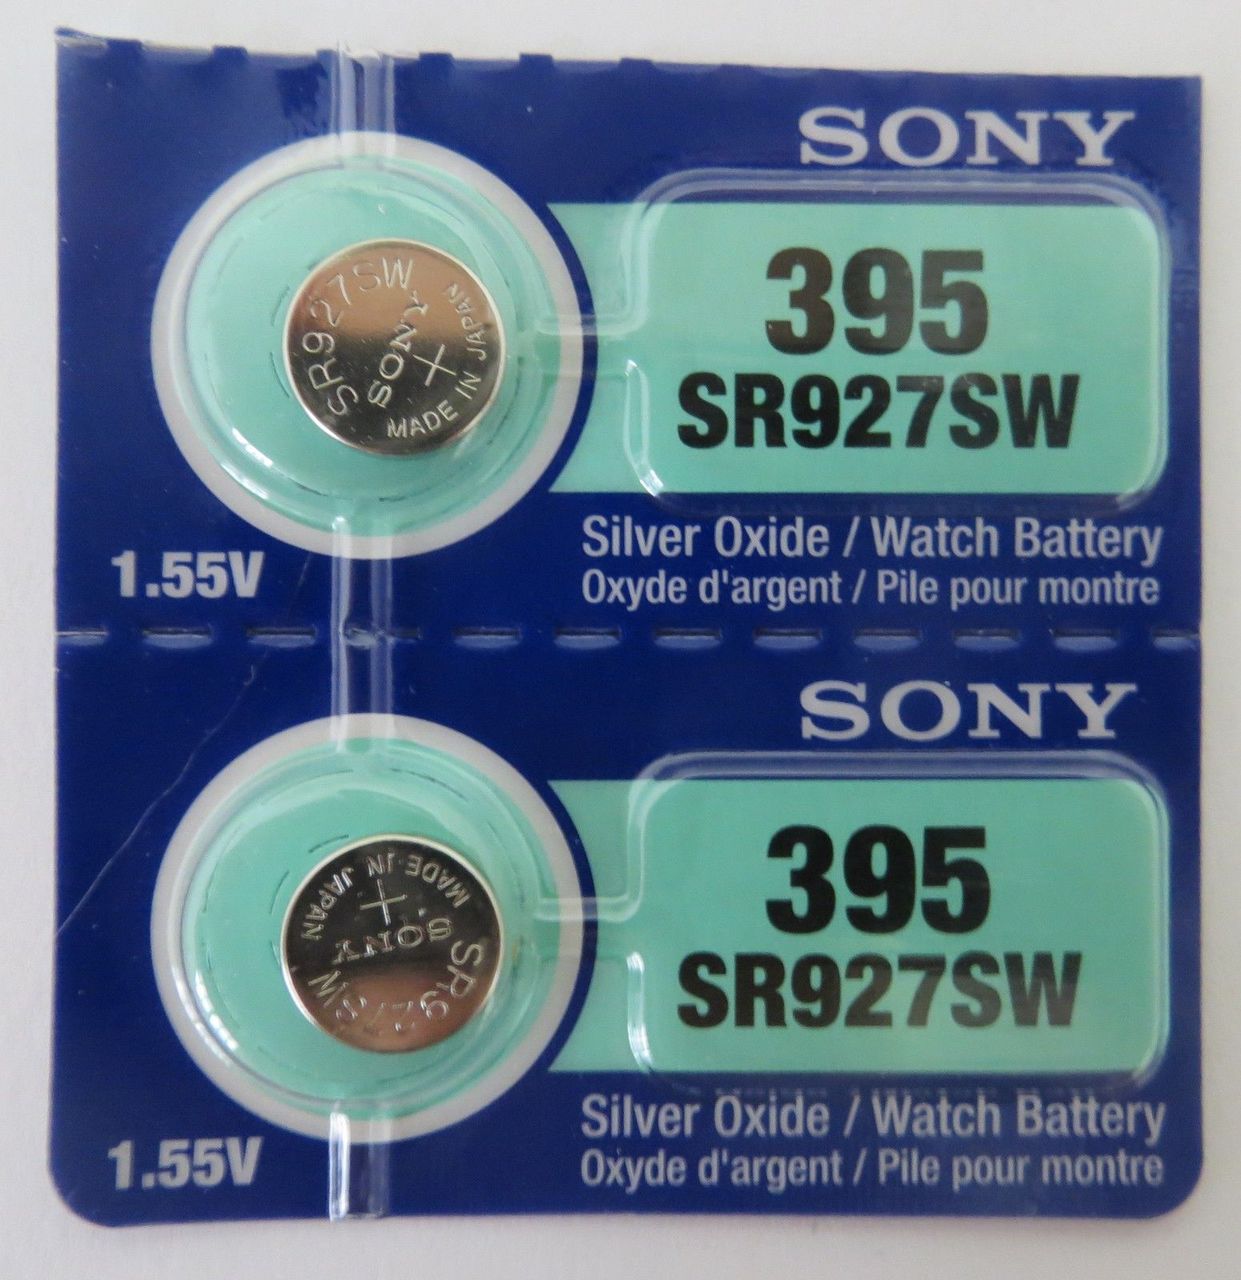 Sony 395/399 - SR927 Silver Oxide Button Battery 1.55V - 2 Pack + FREE SHIPPING!